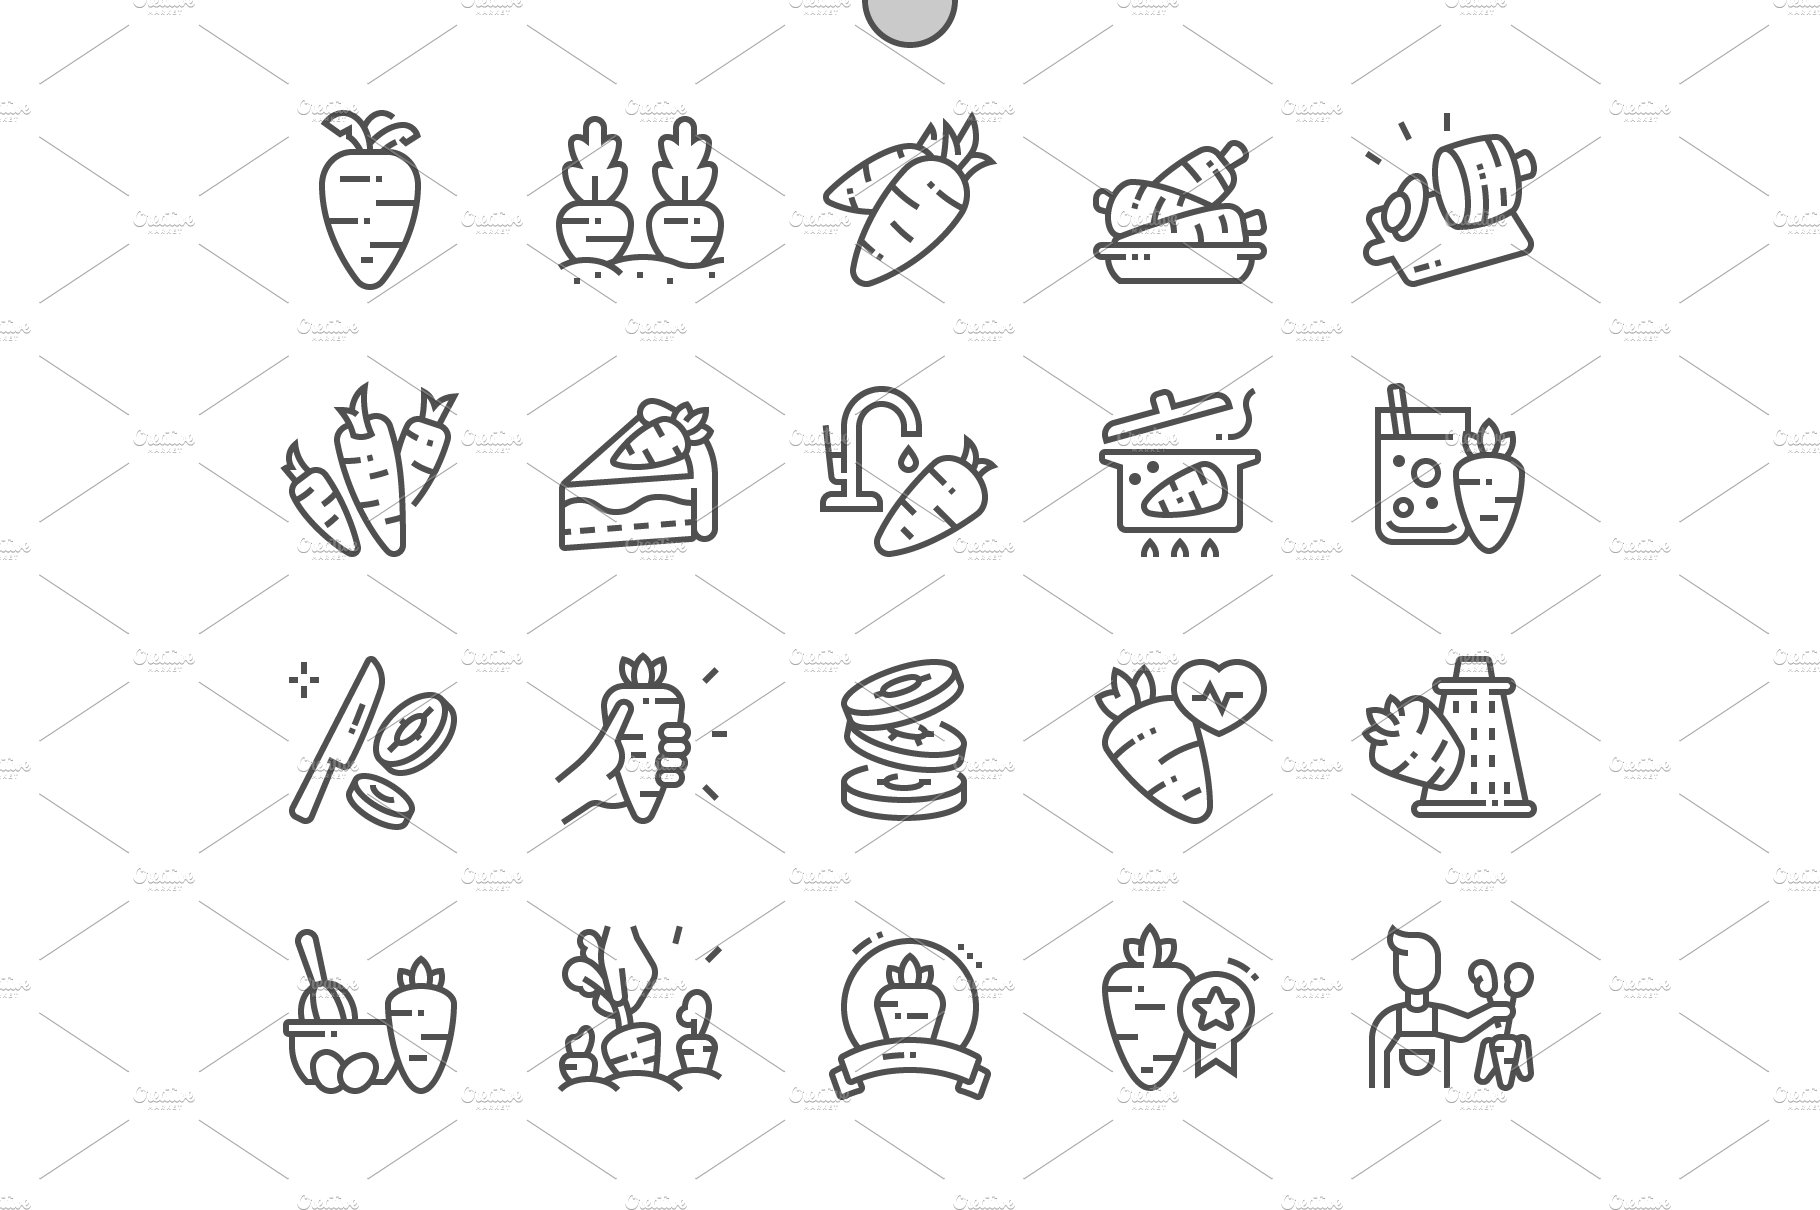 Carrot Line Icons cover image.